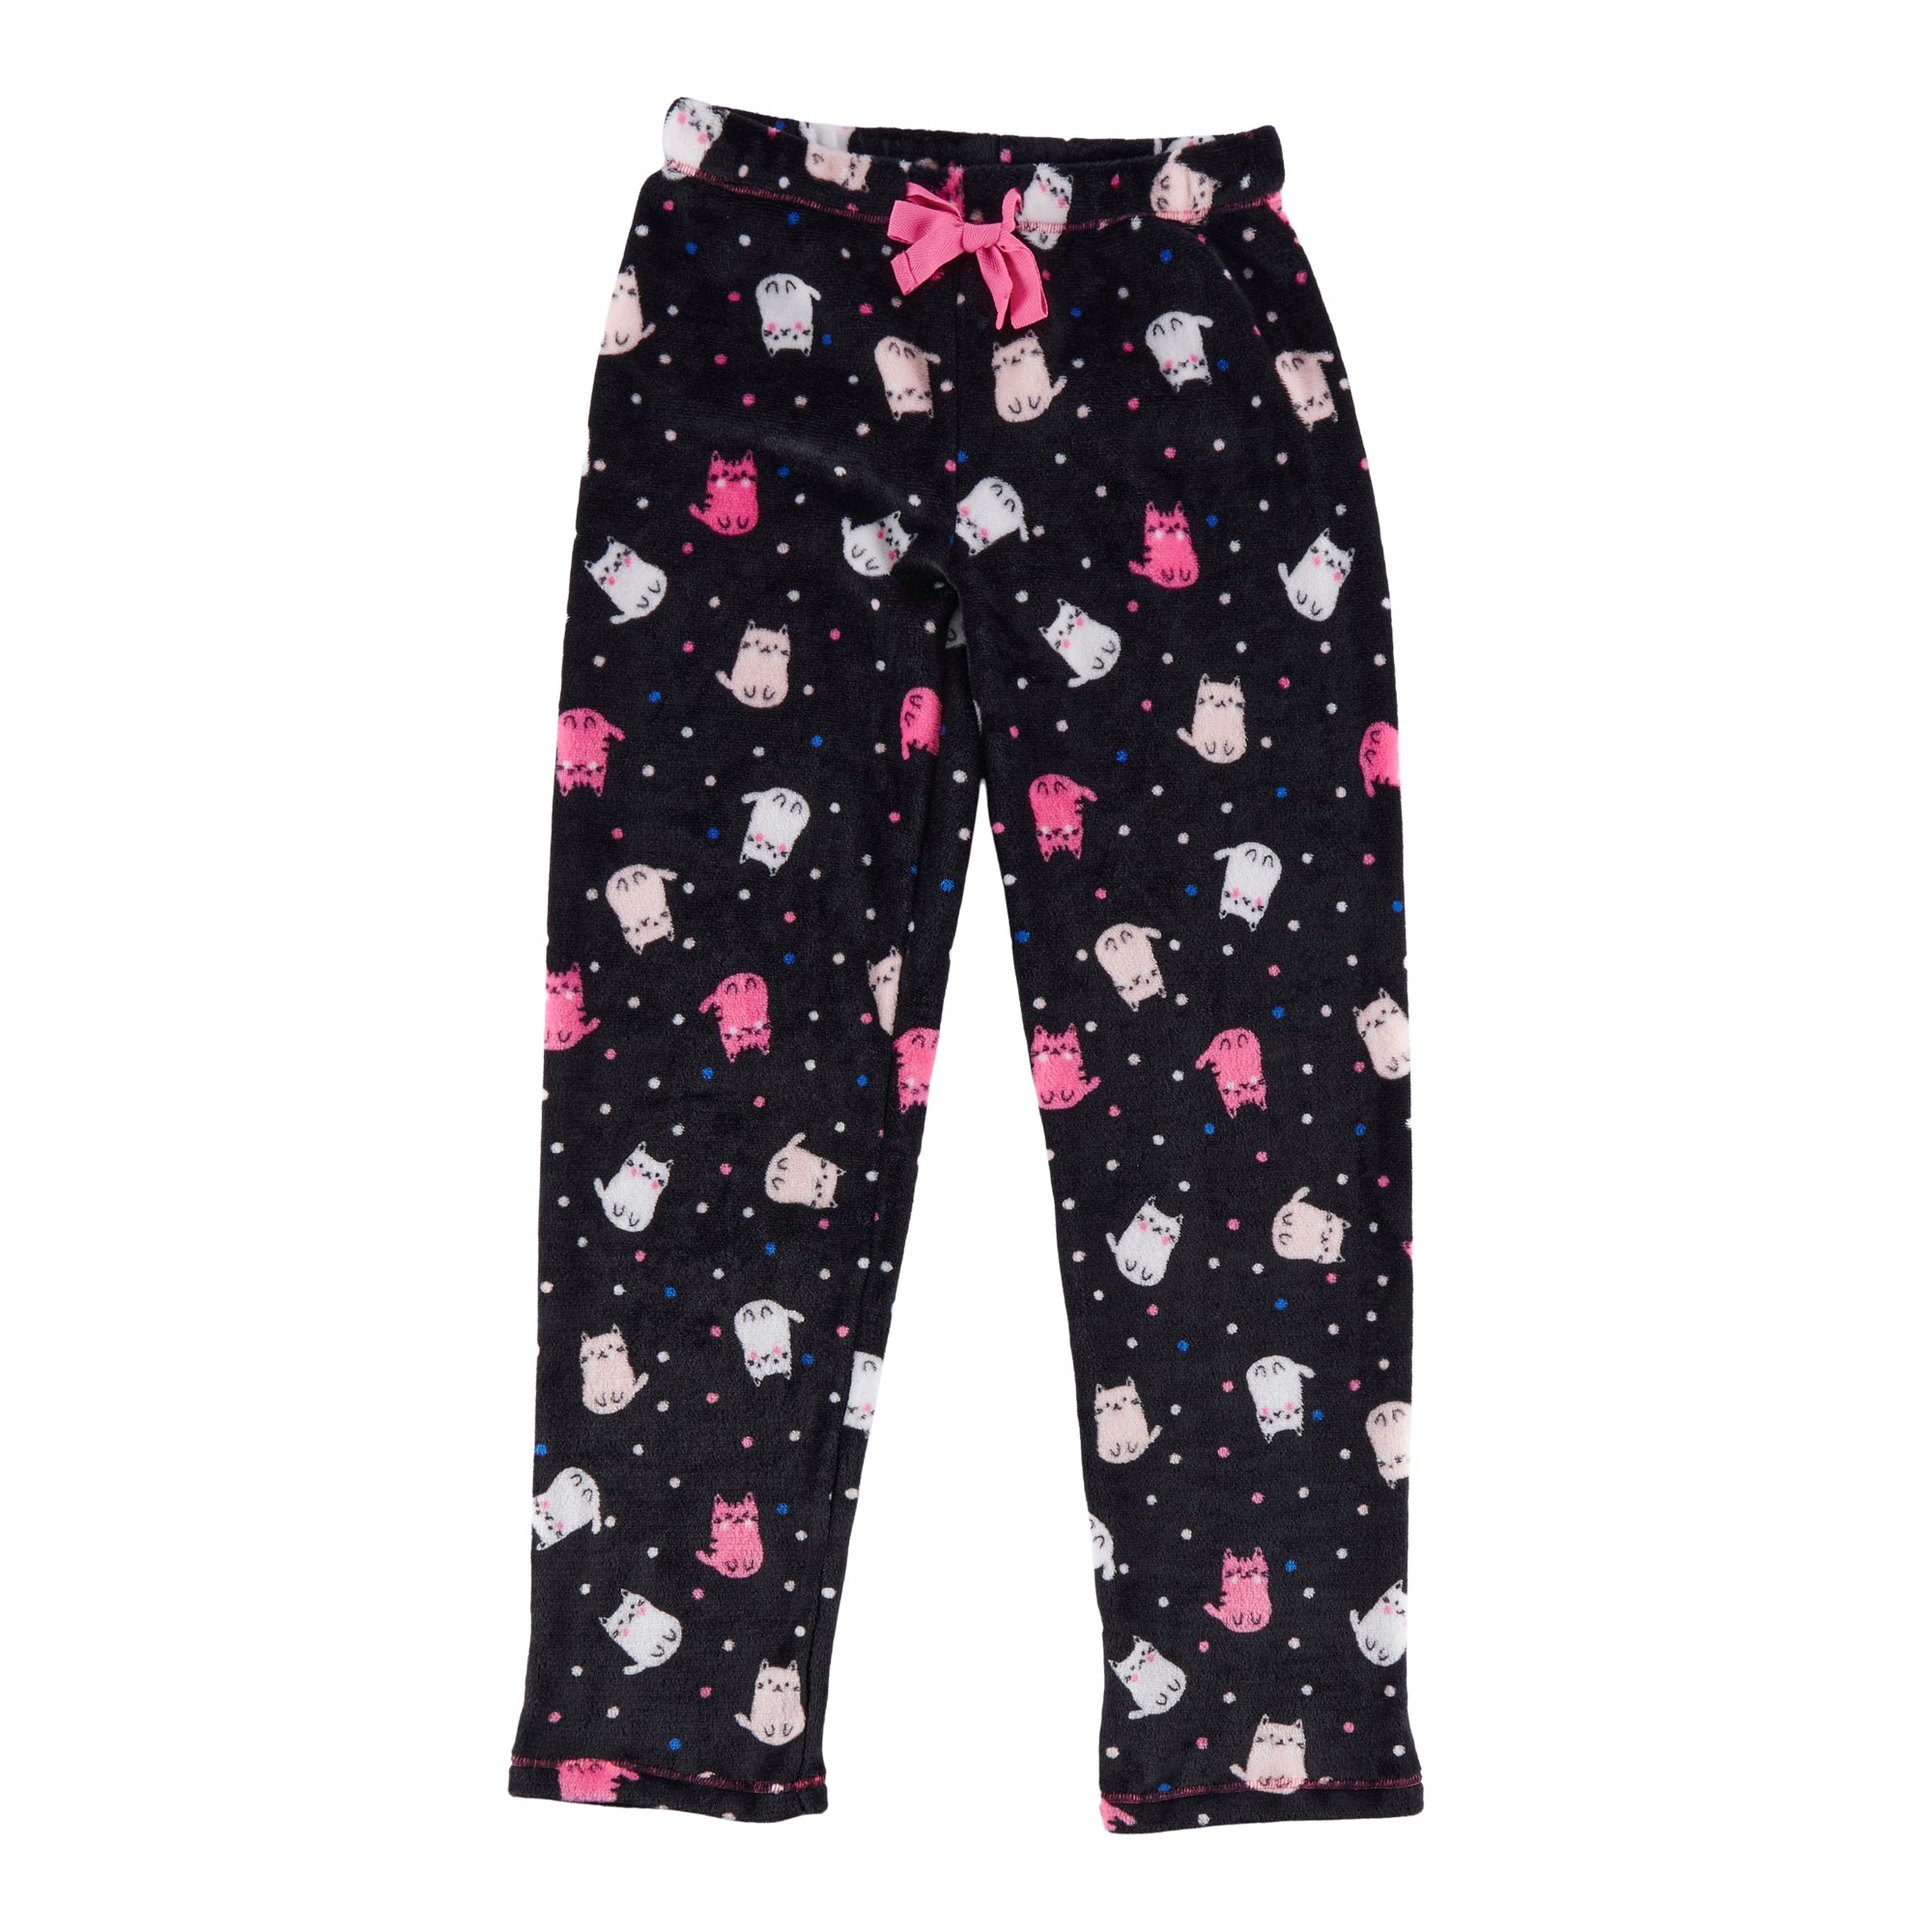 New drop from Giant Tiger. Christmas Hello Kitty PJ pants! They're